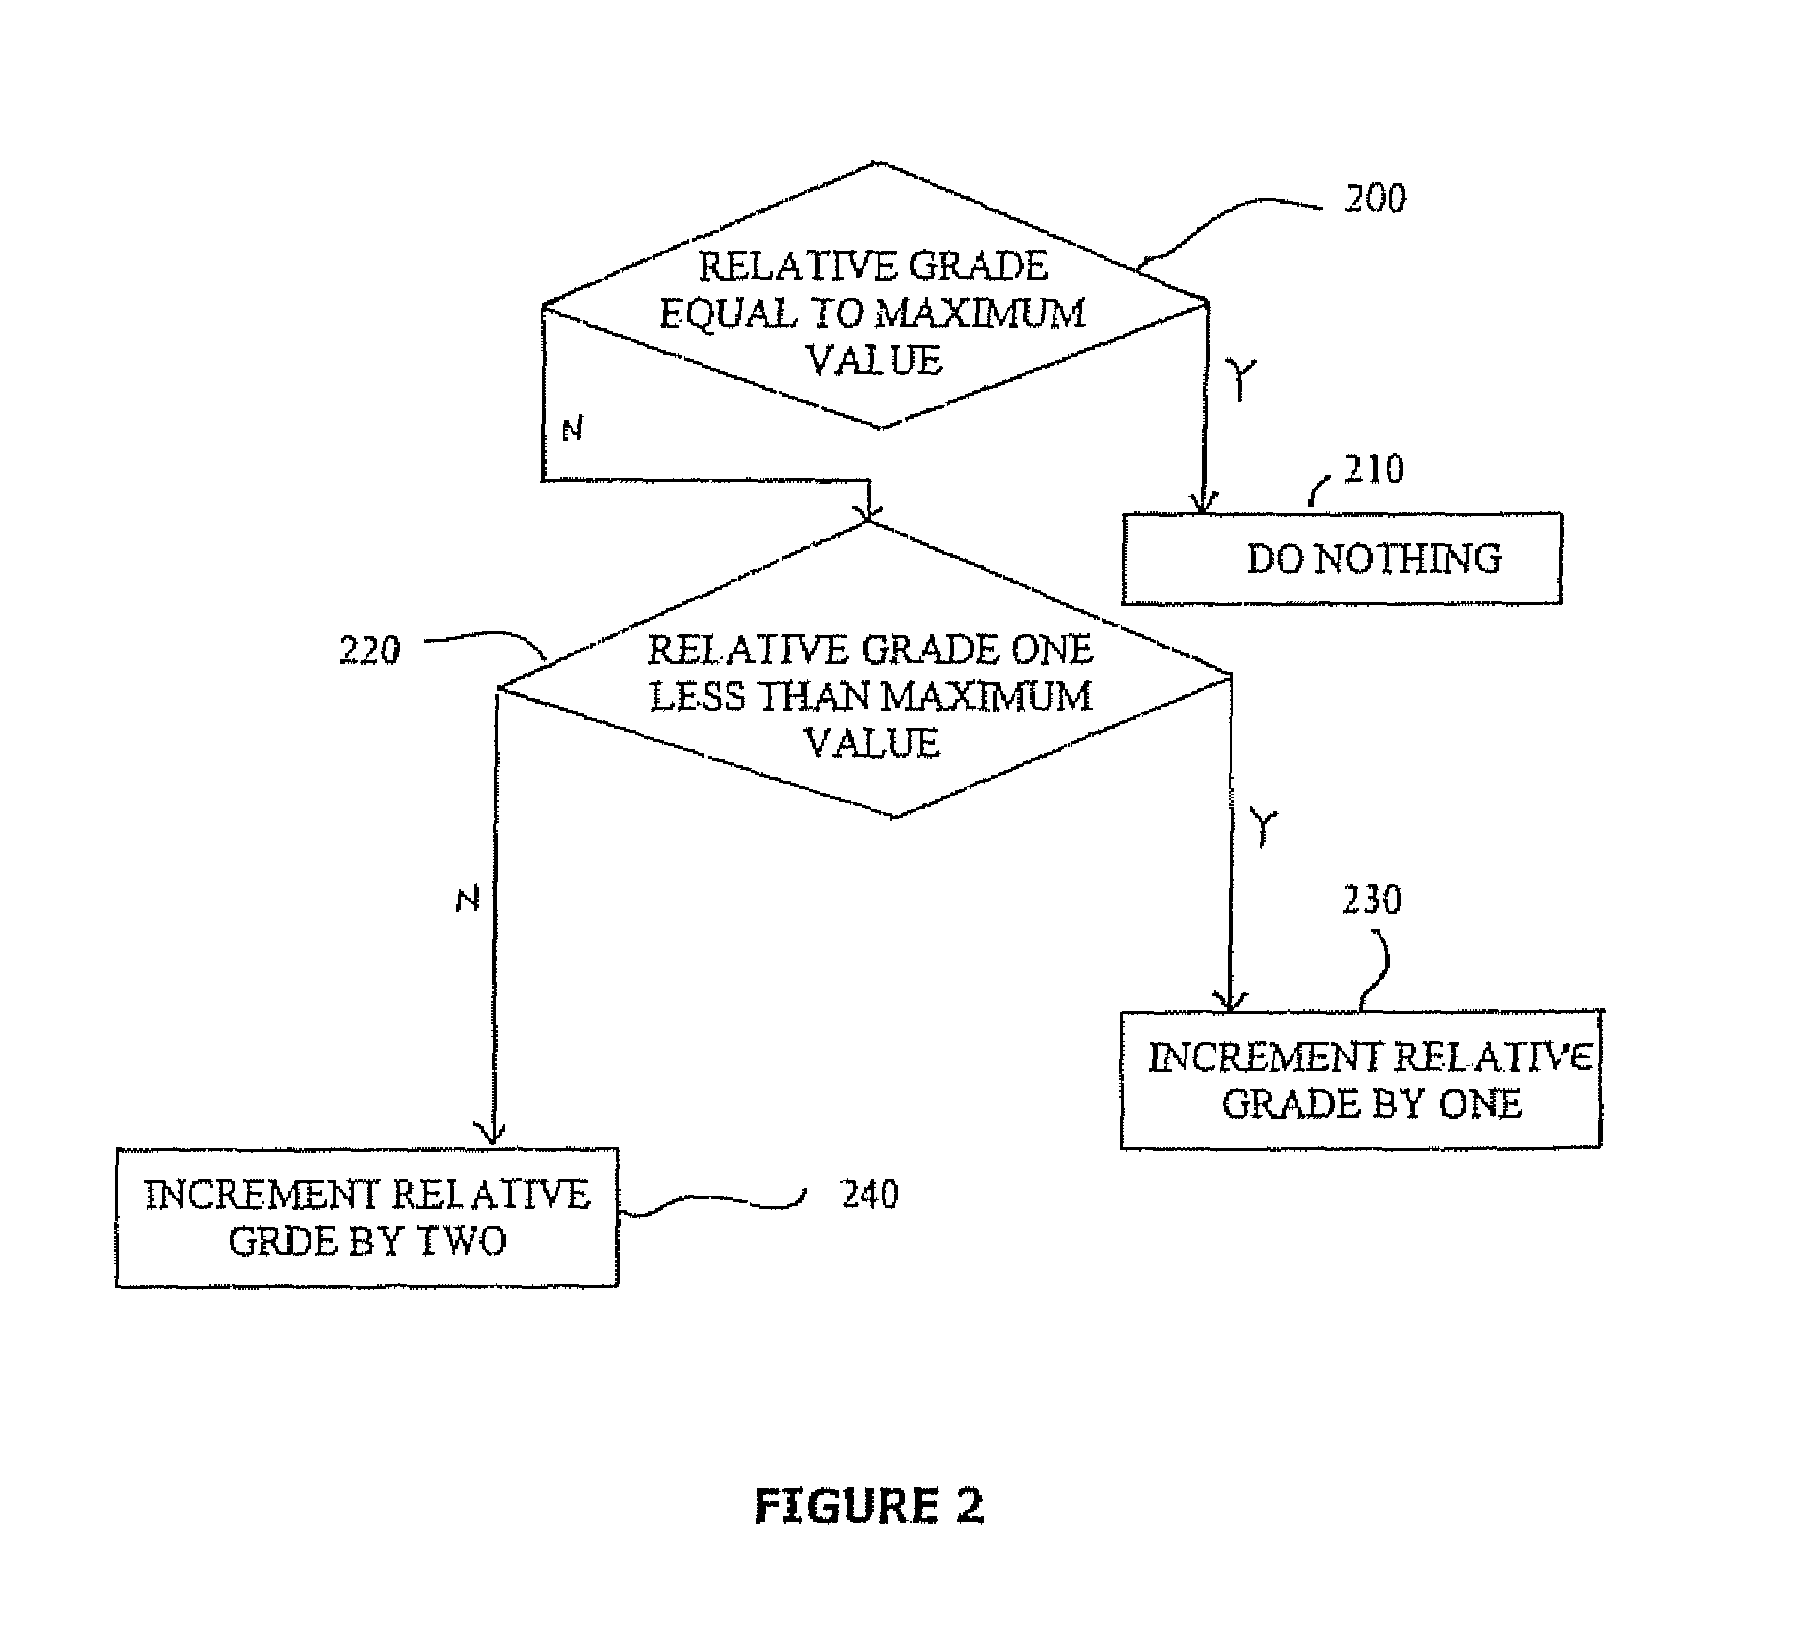 Method of achieving wear leveling in flash memory using relative grades